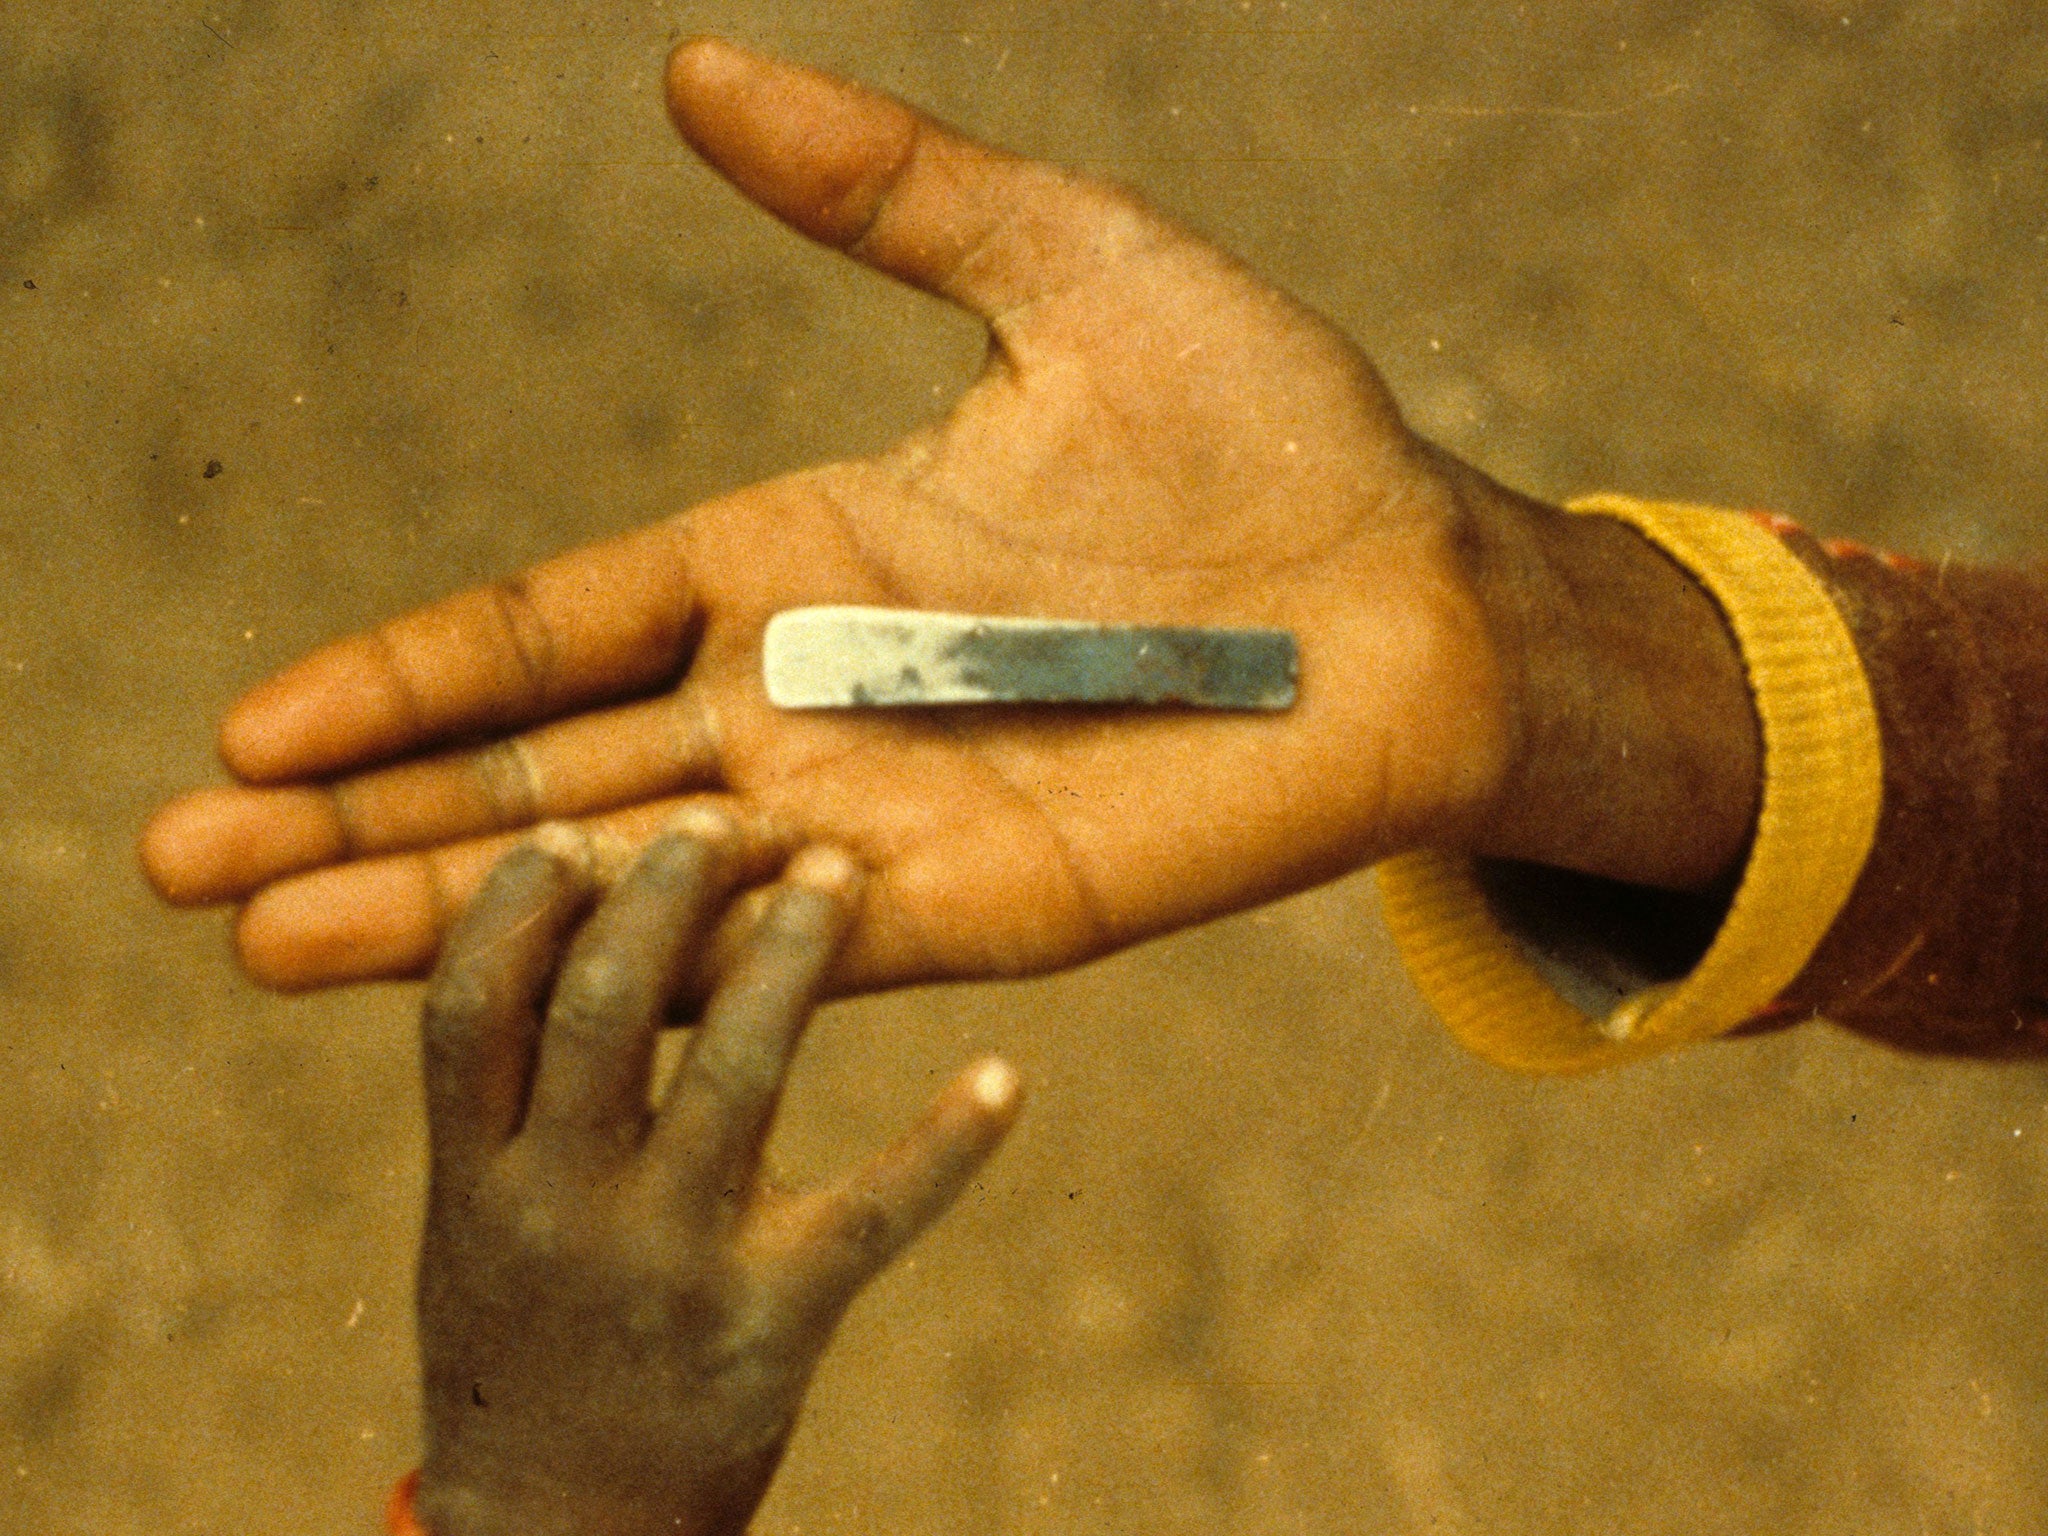 More than 125 million women are thought to be currently living with the consequences of FGM